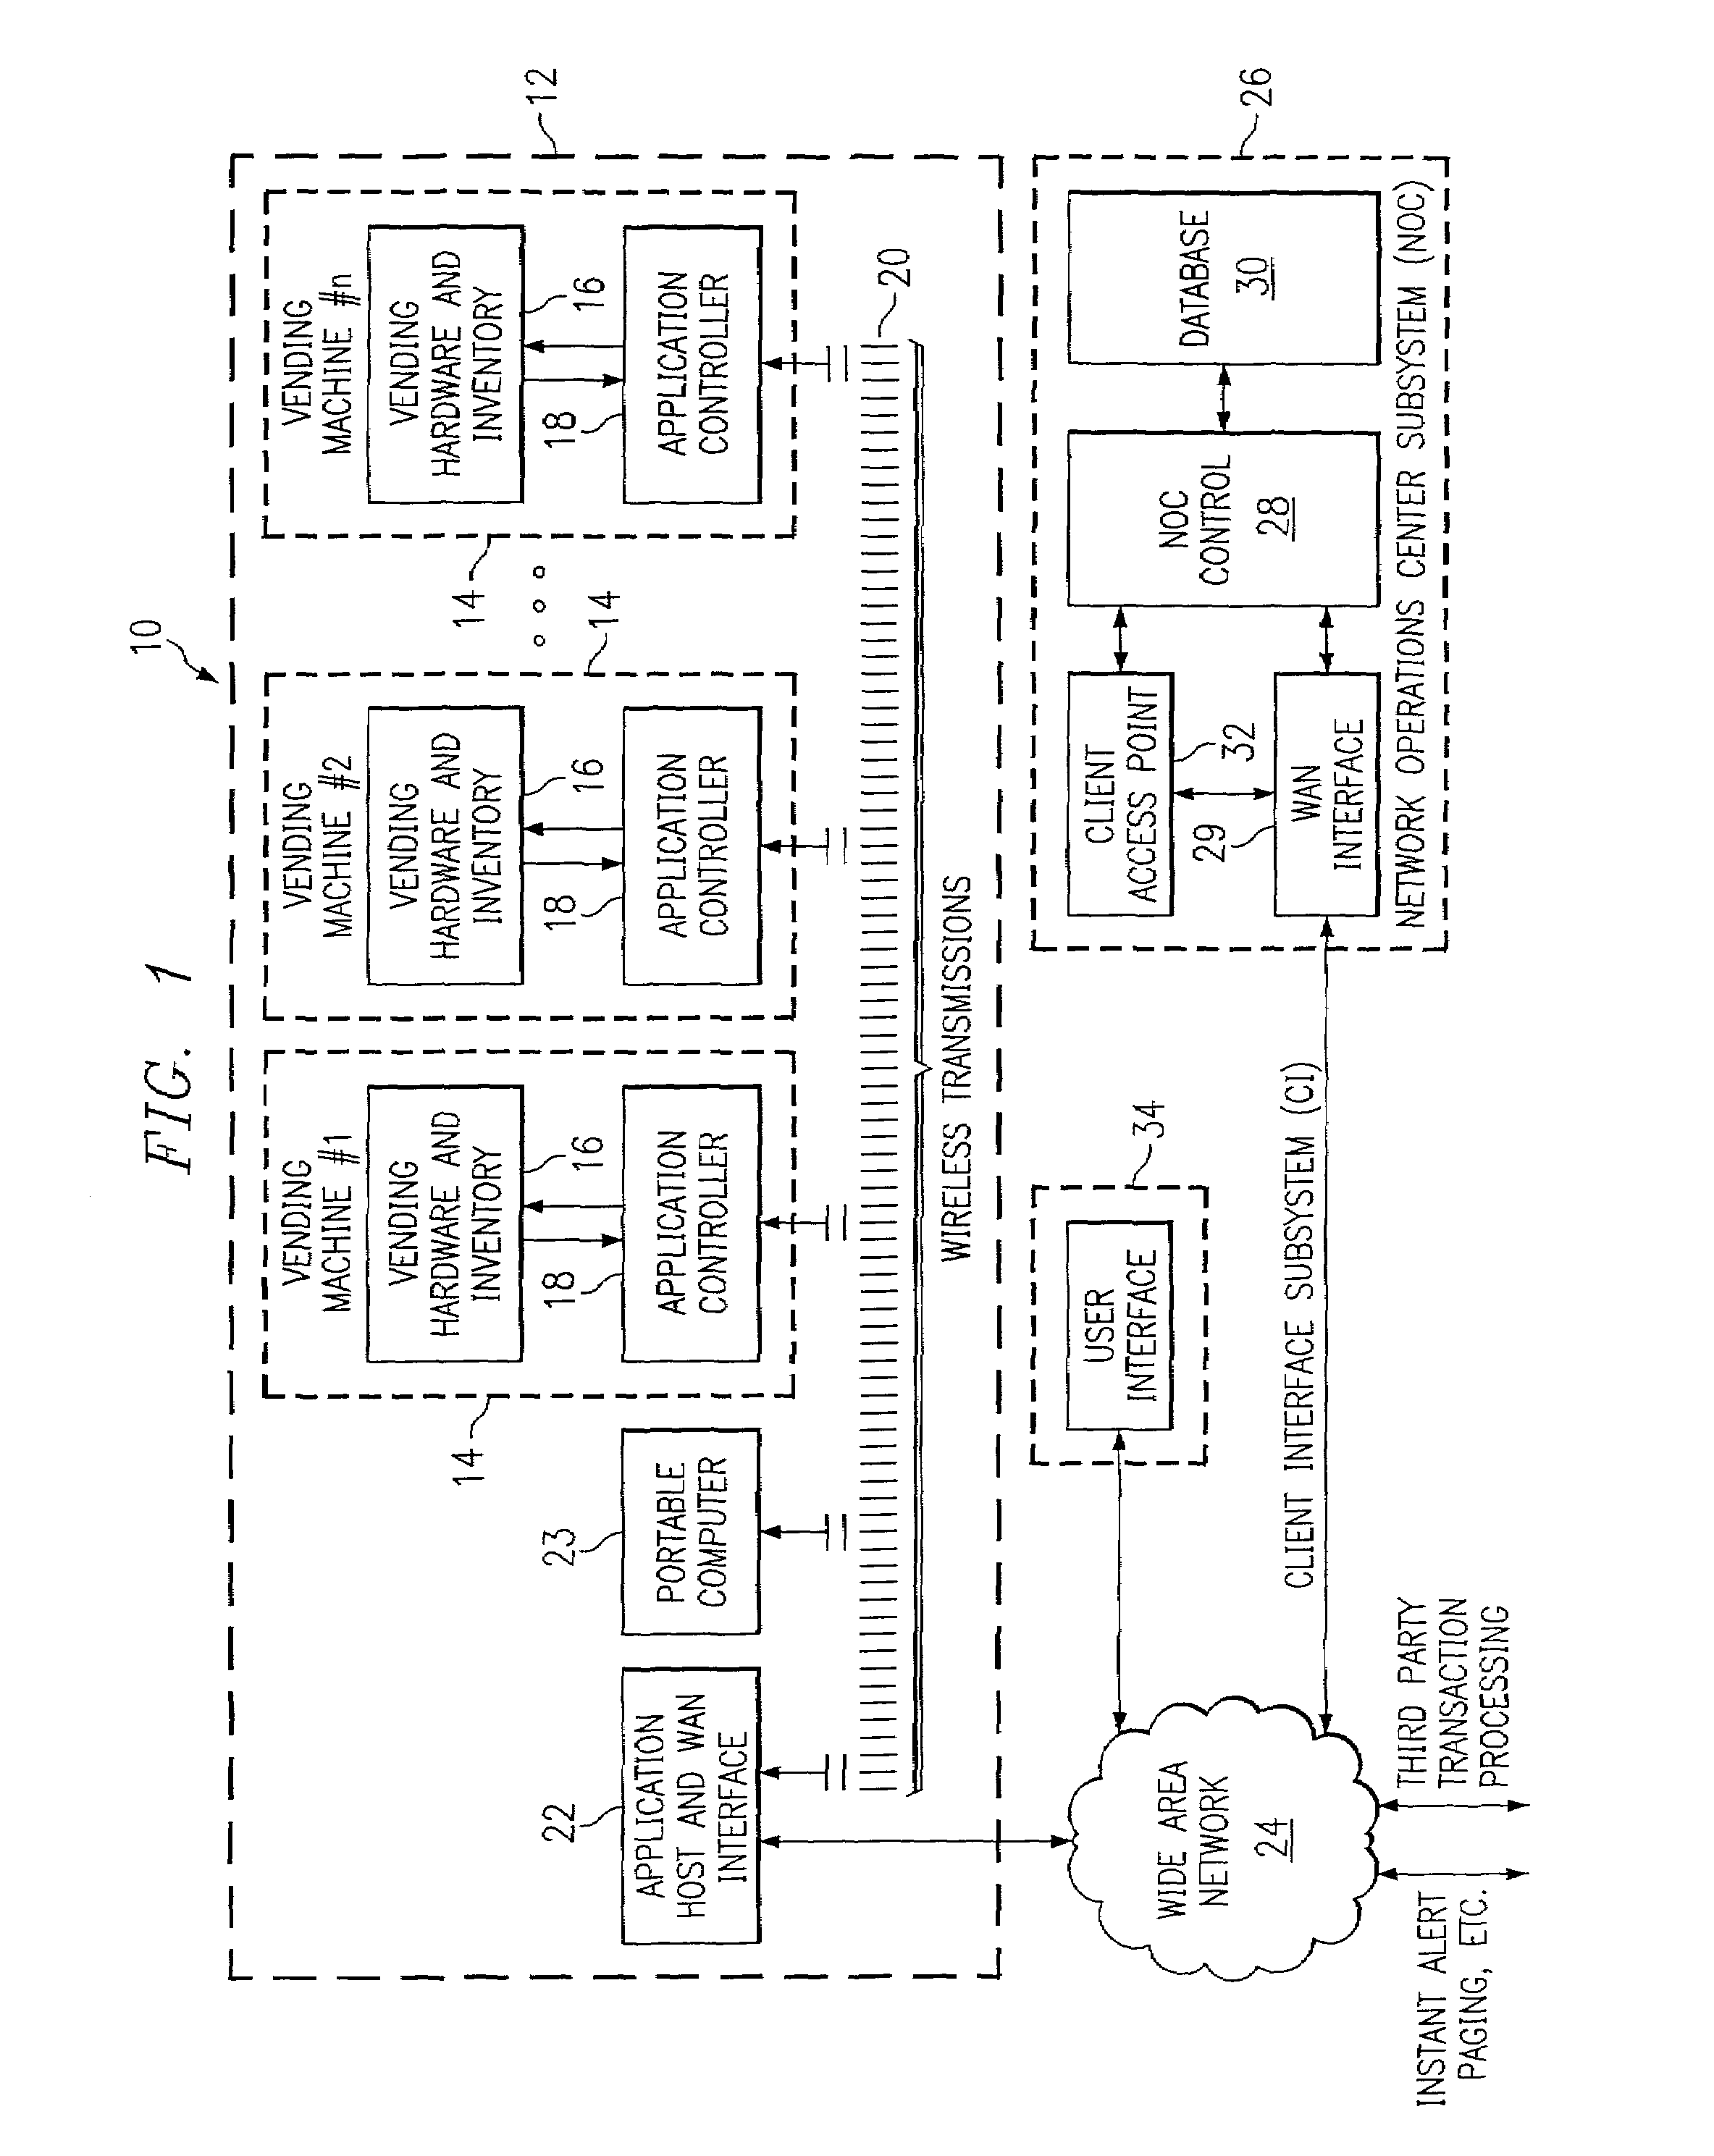 Method and system for interfacing a machine controller and a wireless network